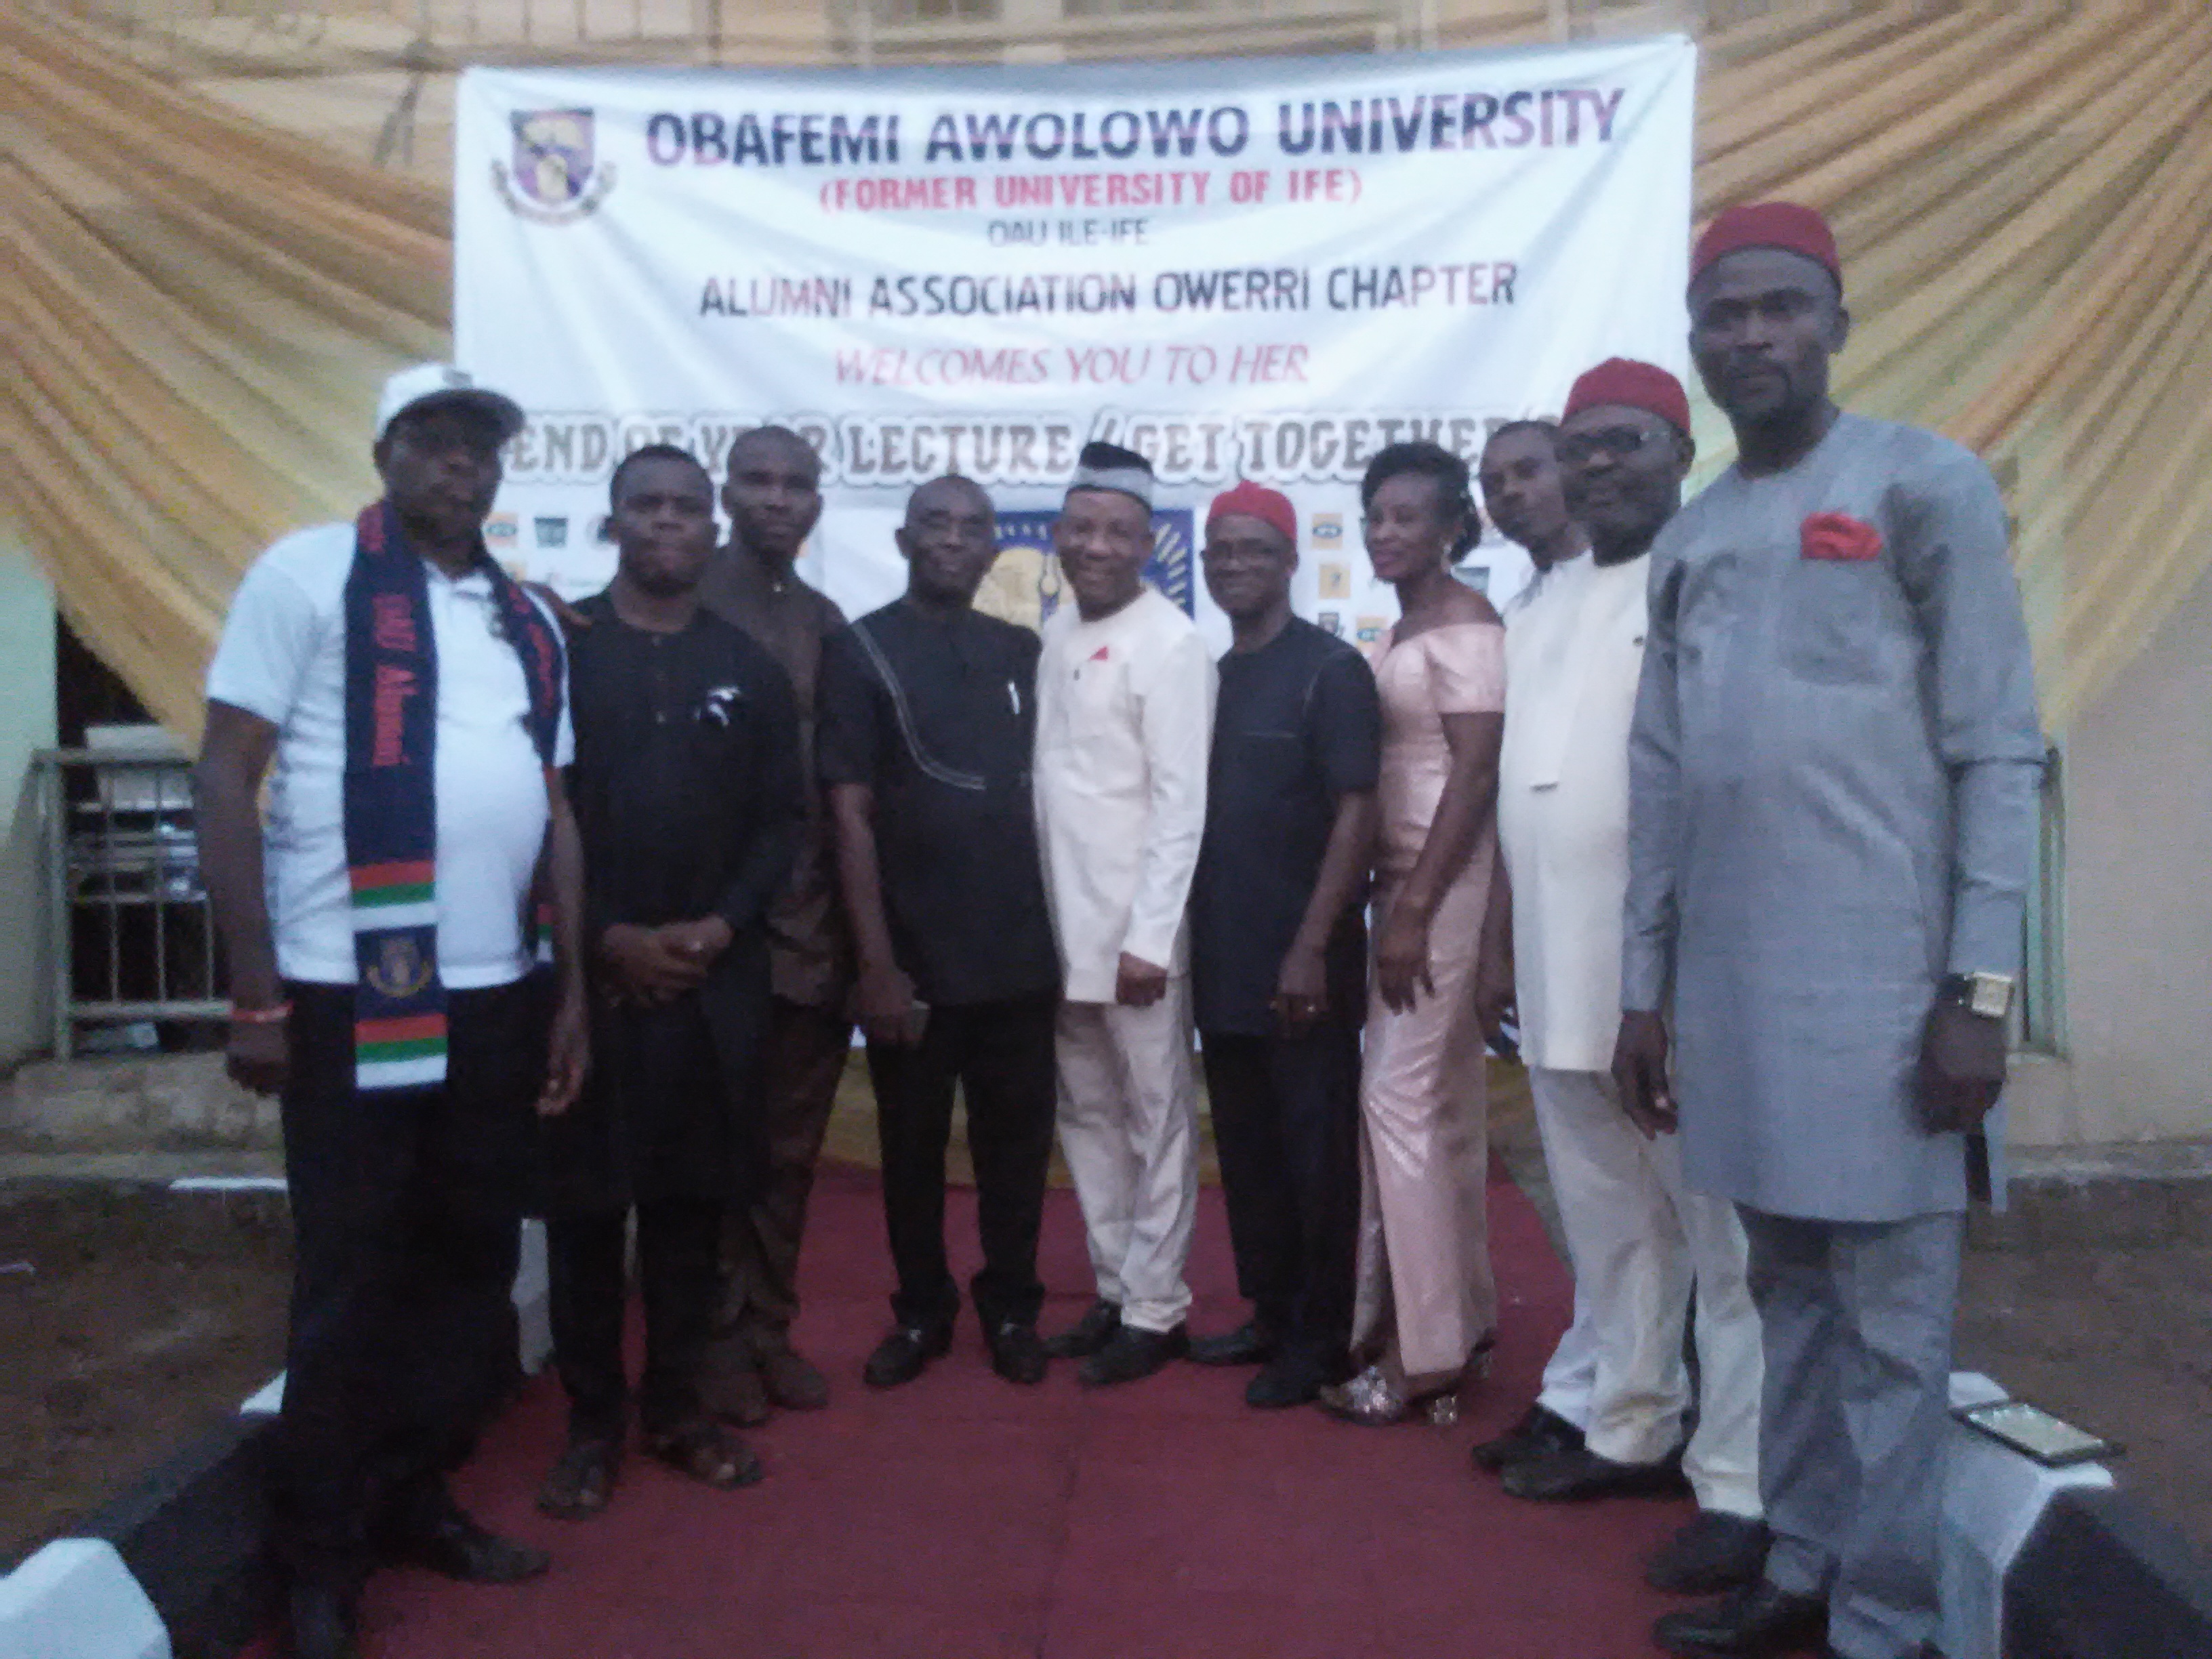 What Imo Ife Alumni Association did differently at their end of the year get-together